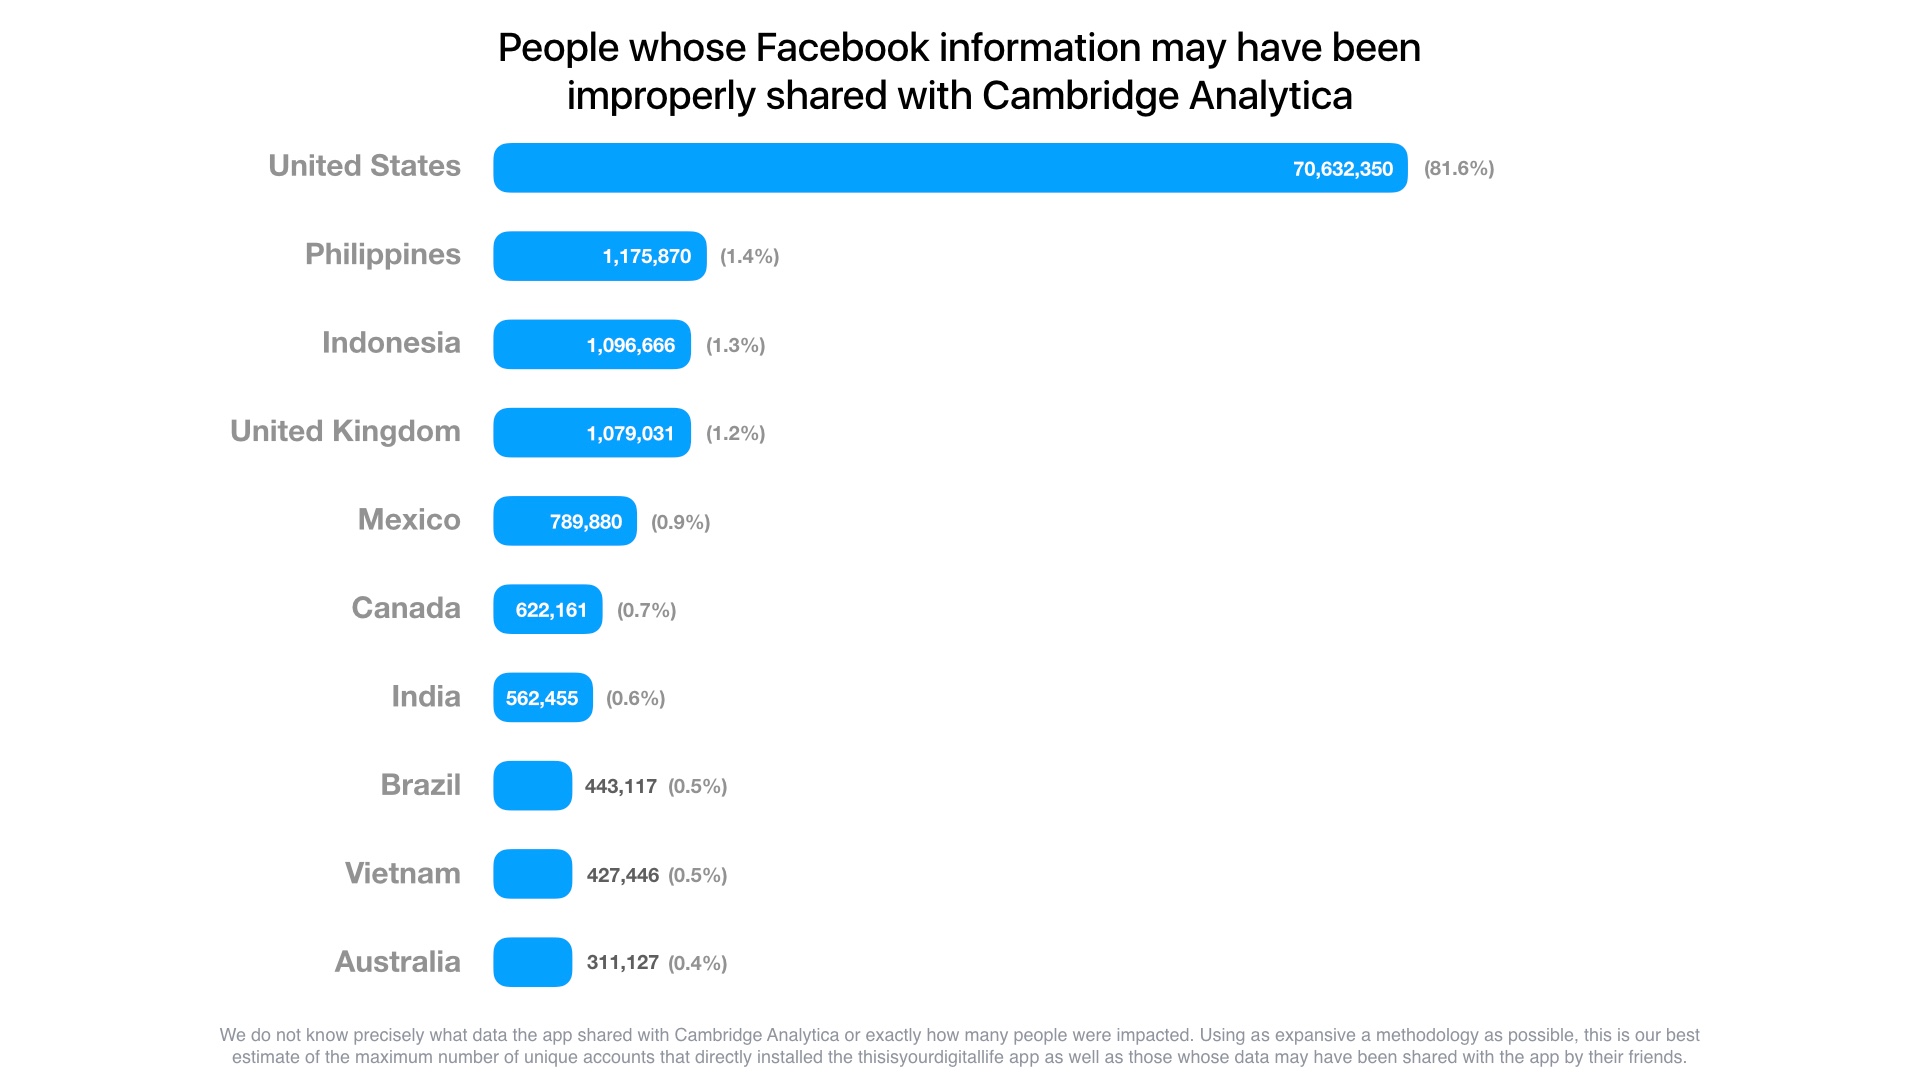 Number of users whose Facebook information may have been improperly shared with Cambridge Analytica - by country